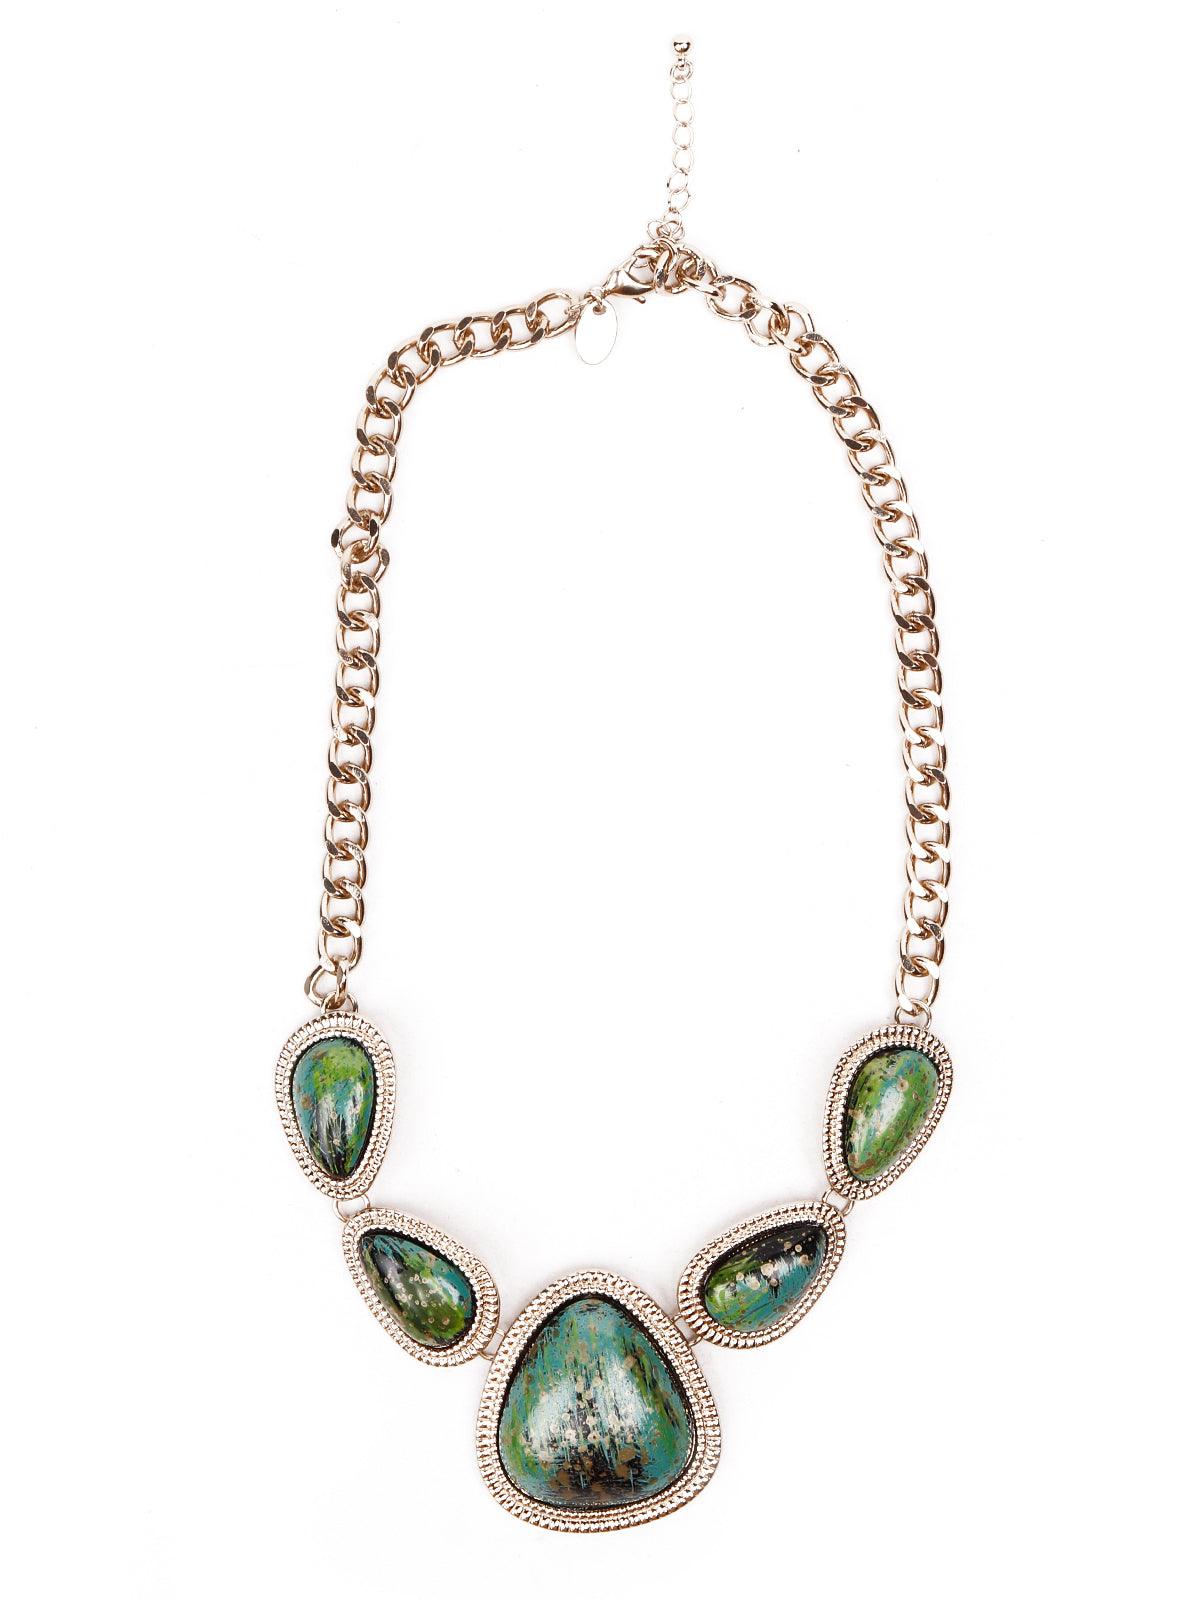 VeroniQ Trends-Bold Statement Necklace in Polki With Green Meenakari And  Quartz Beads-Party Necklace-Indian Jewelry-Necklace-South Indian-VJ -  VeroniQ Trends